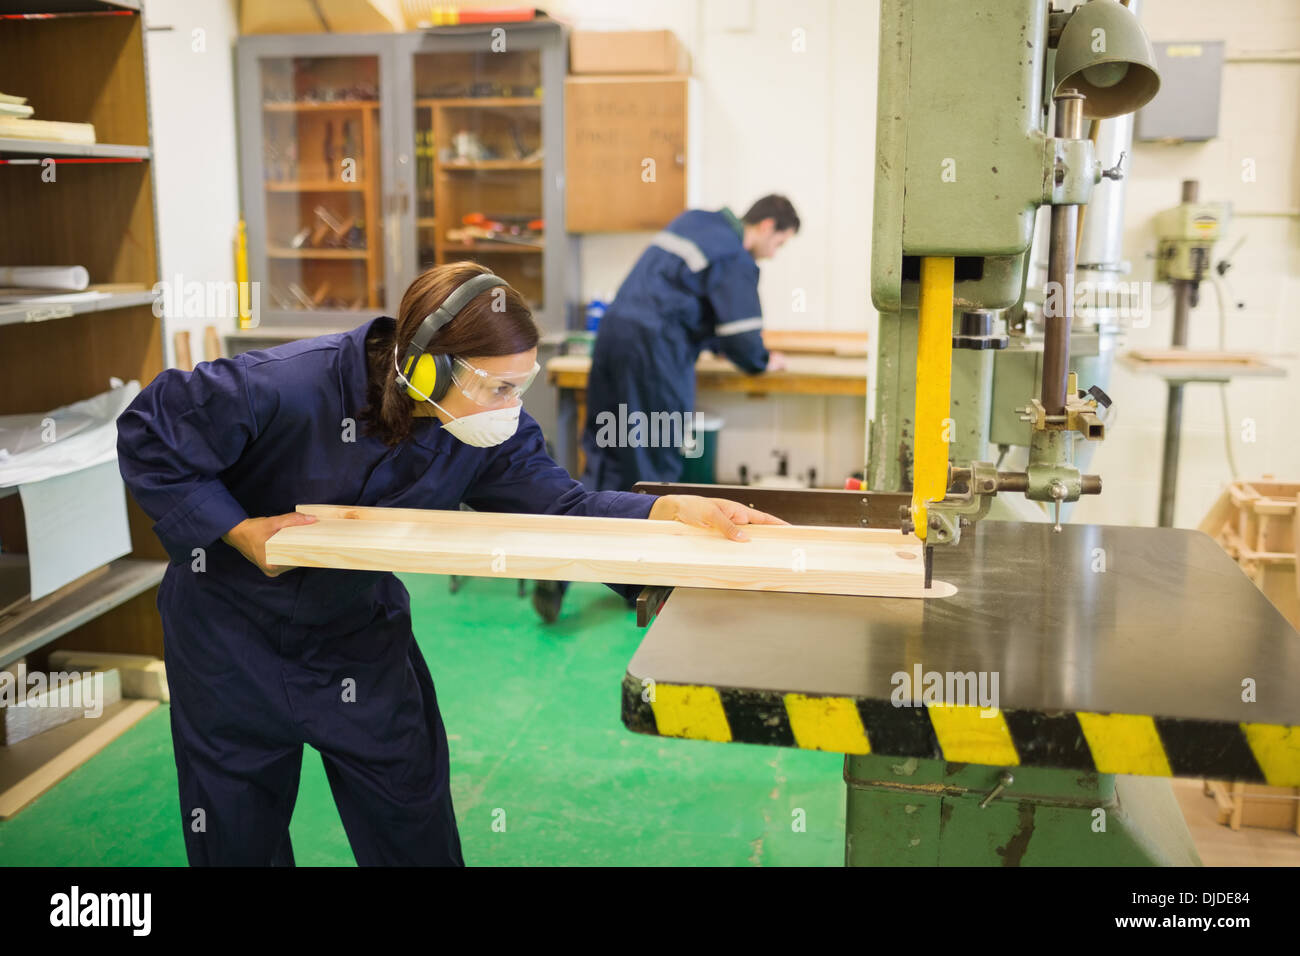 Concentrating trainee wearing safety protection using a saw Stock Photo